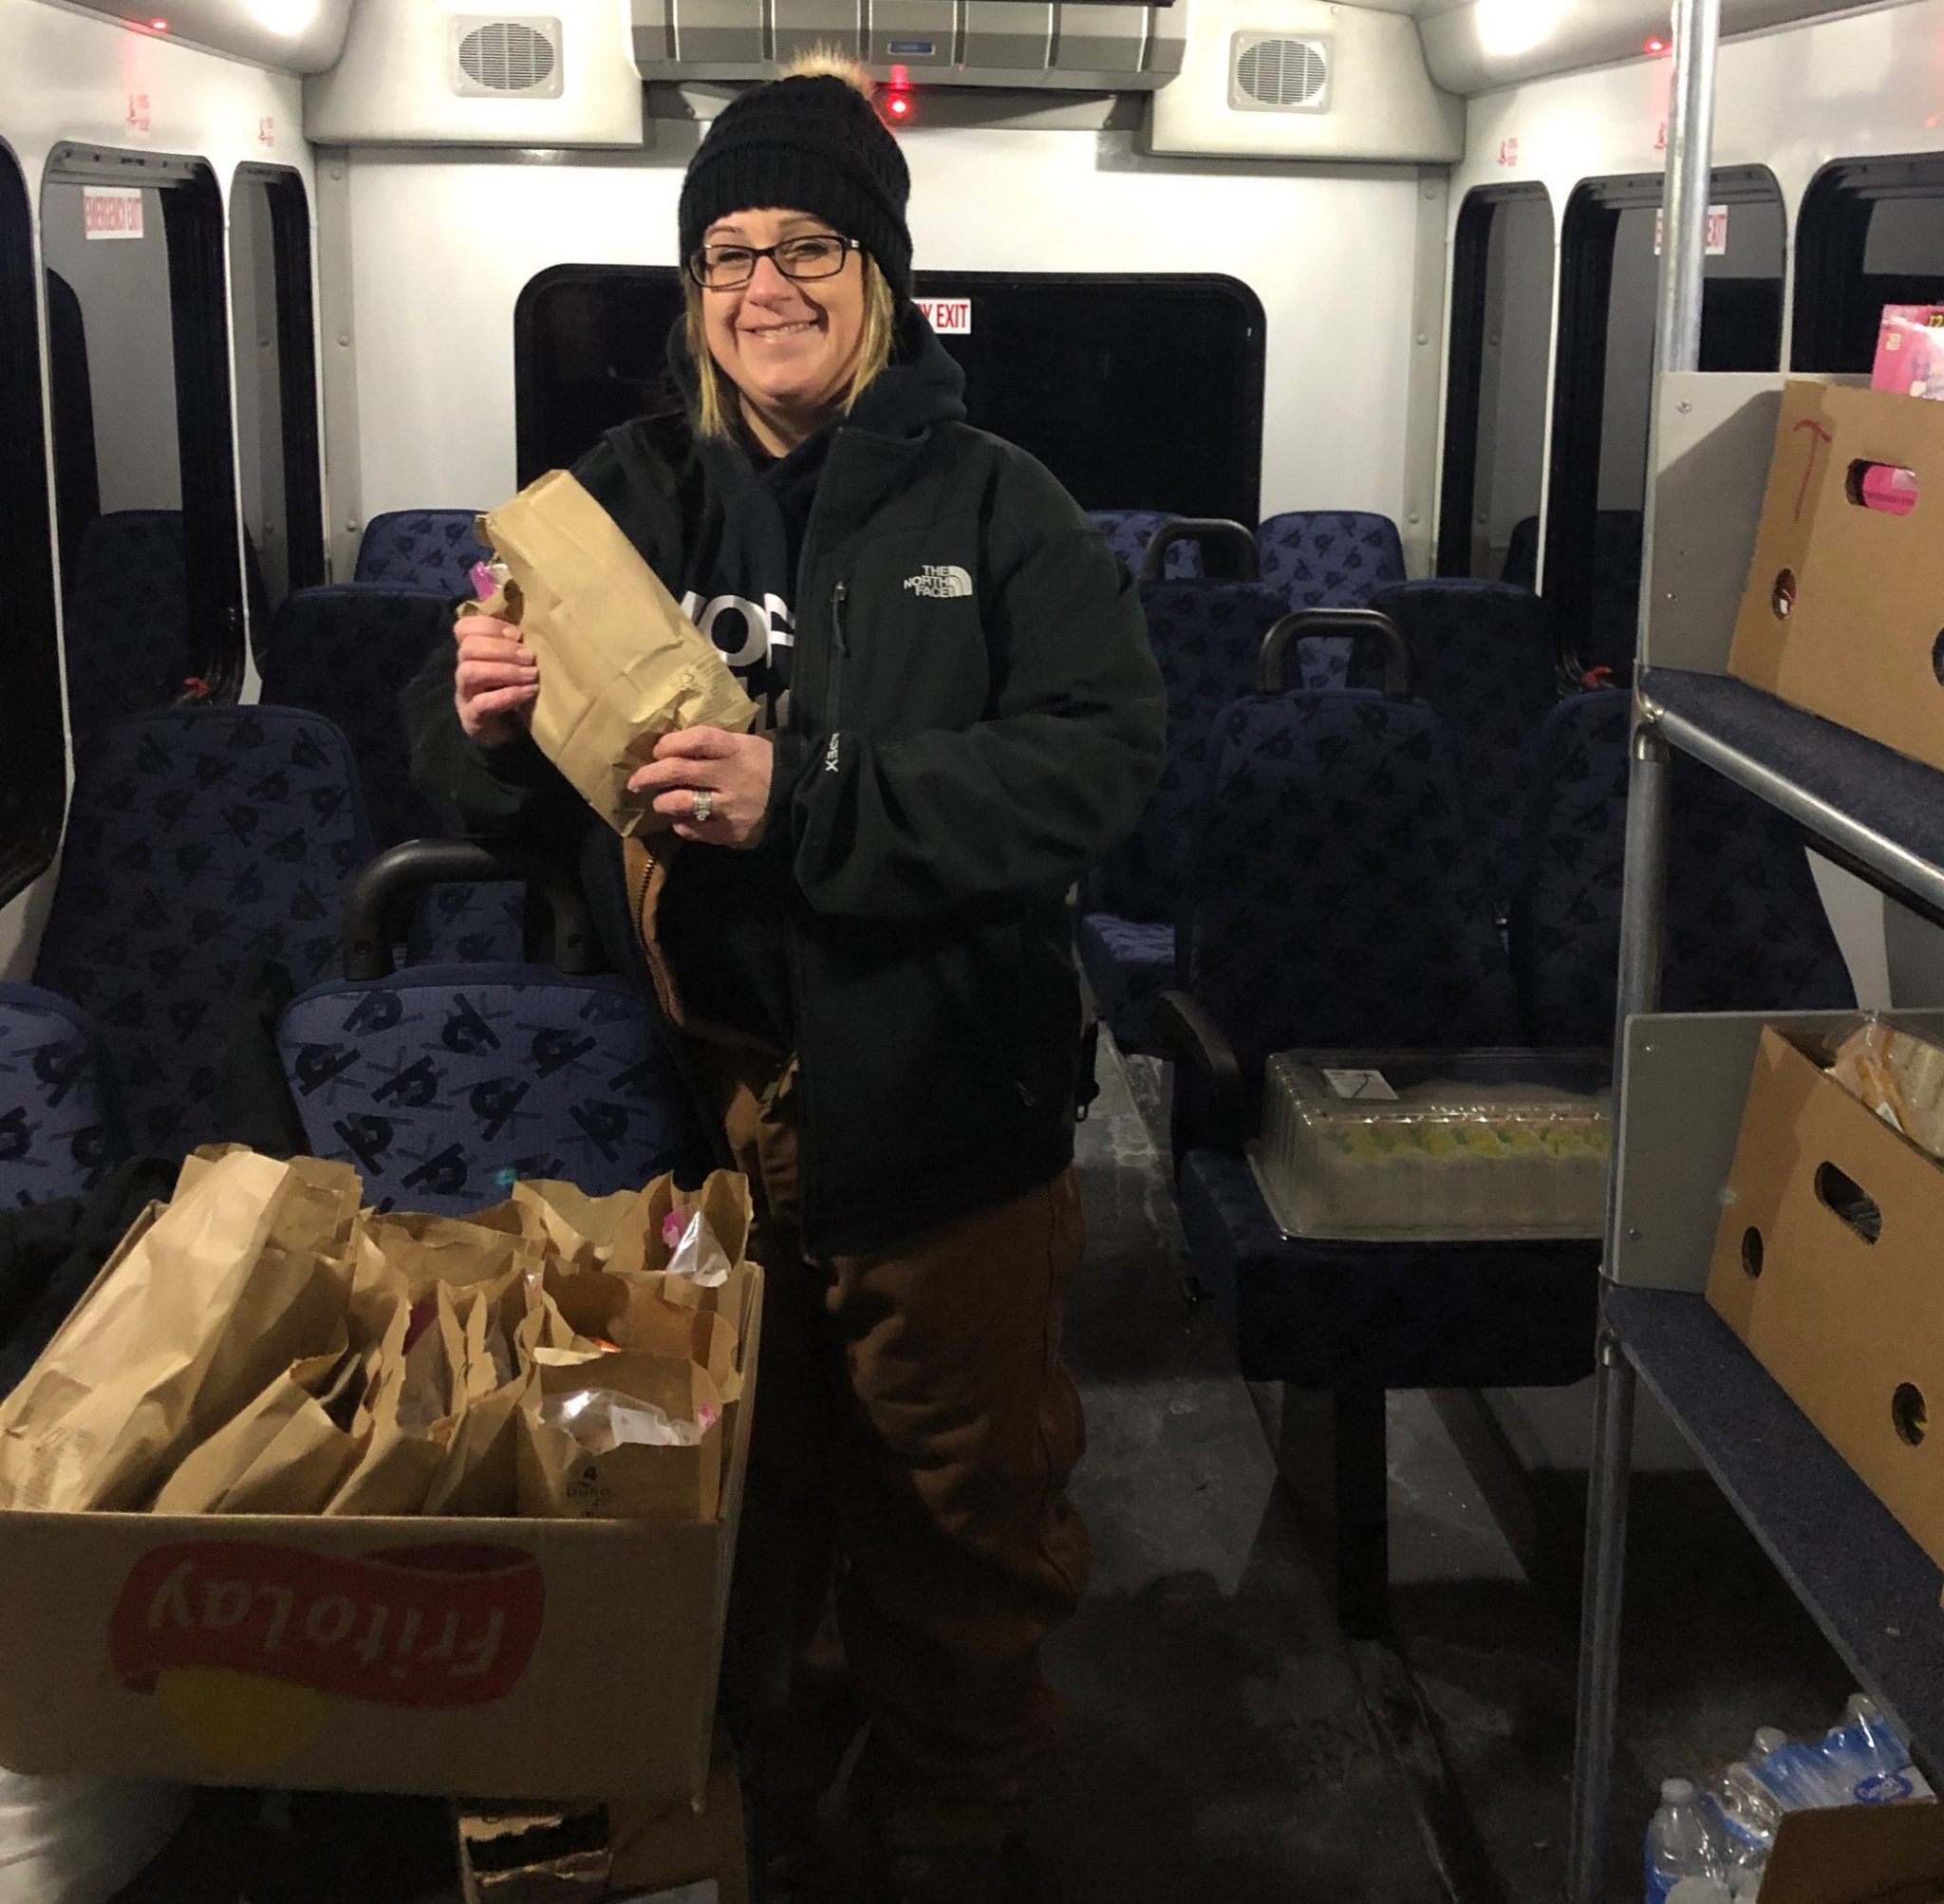 Stocking up the Street Angels bus and delivery team with bag meals